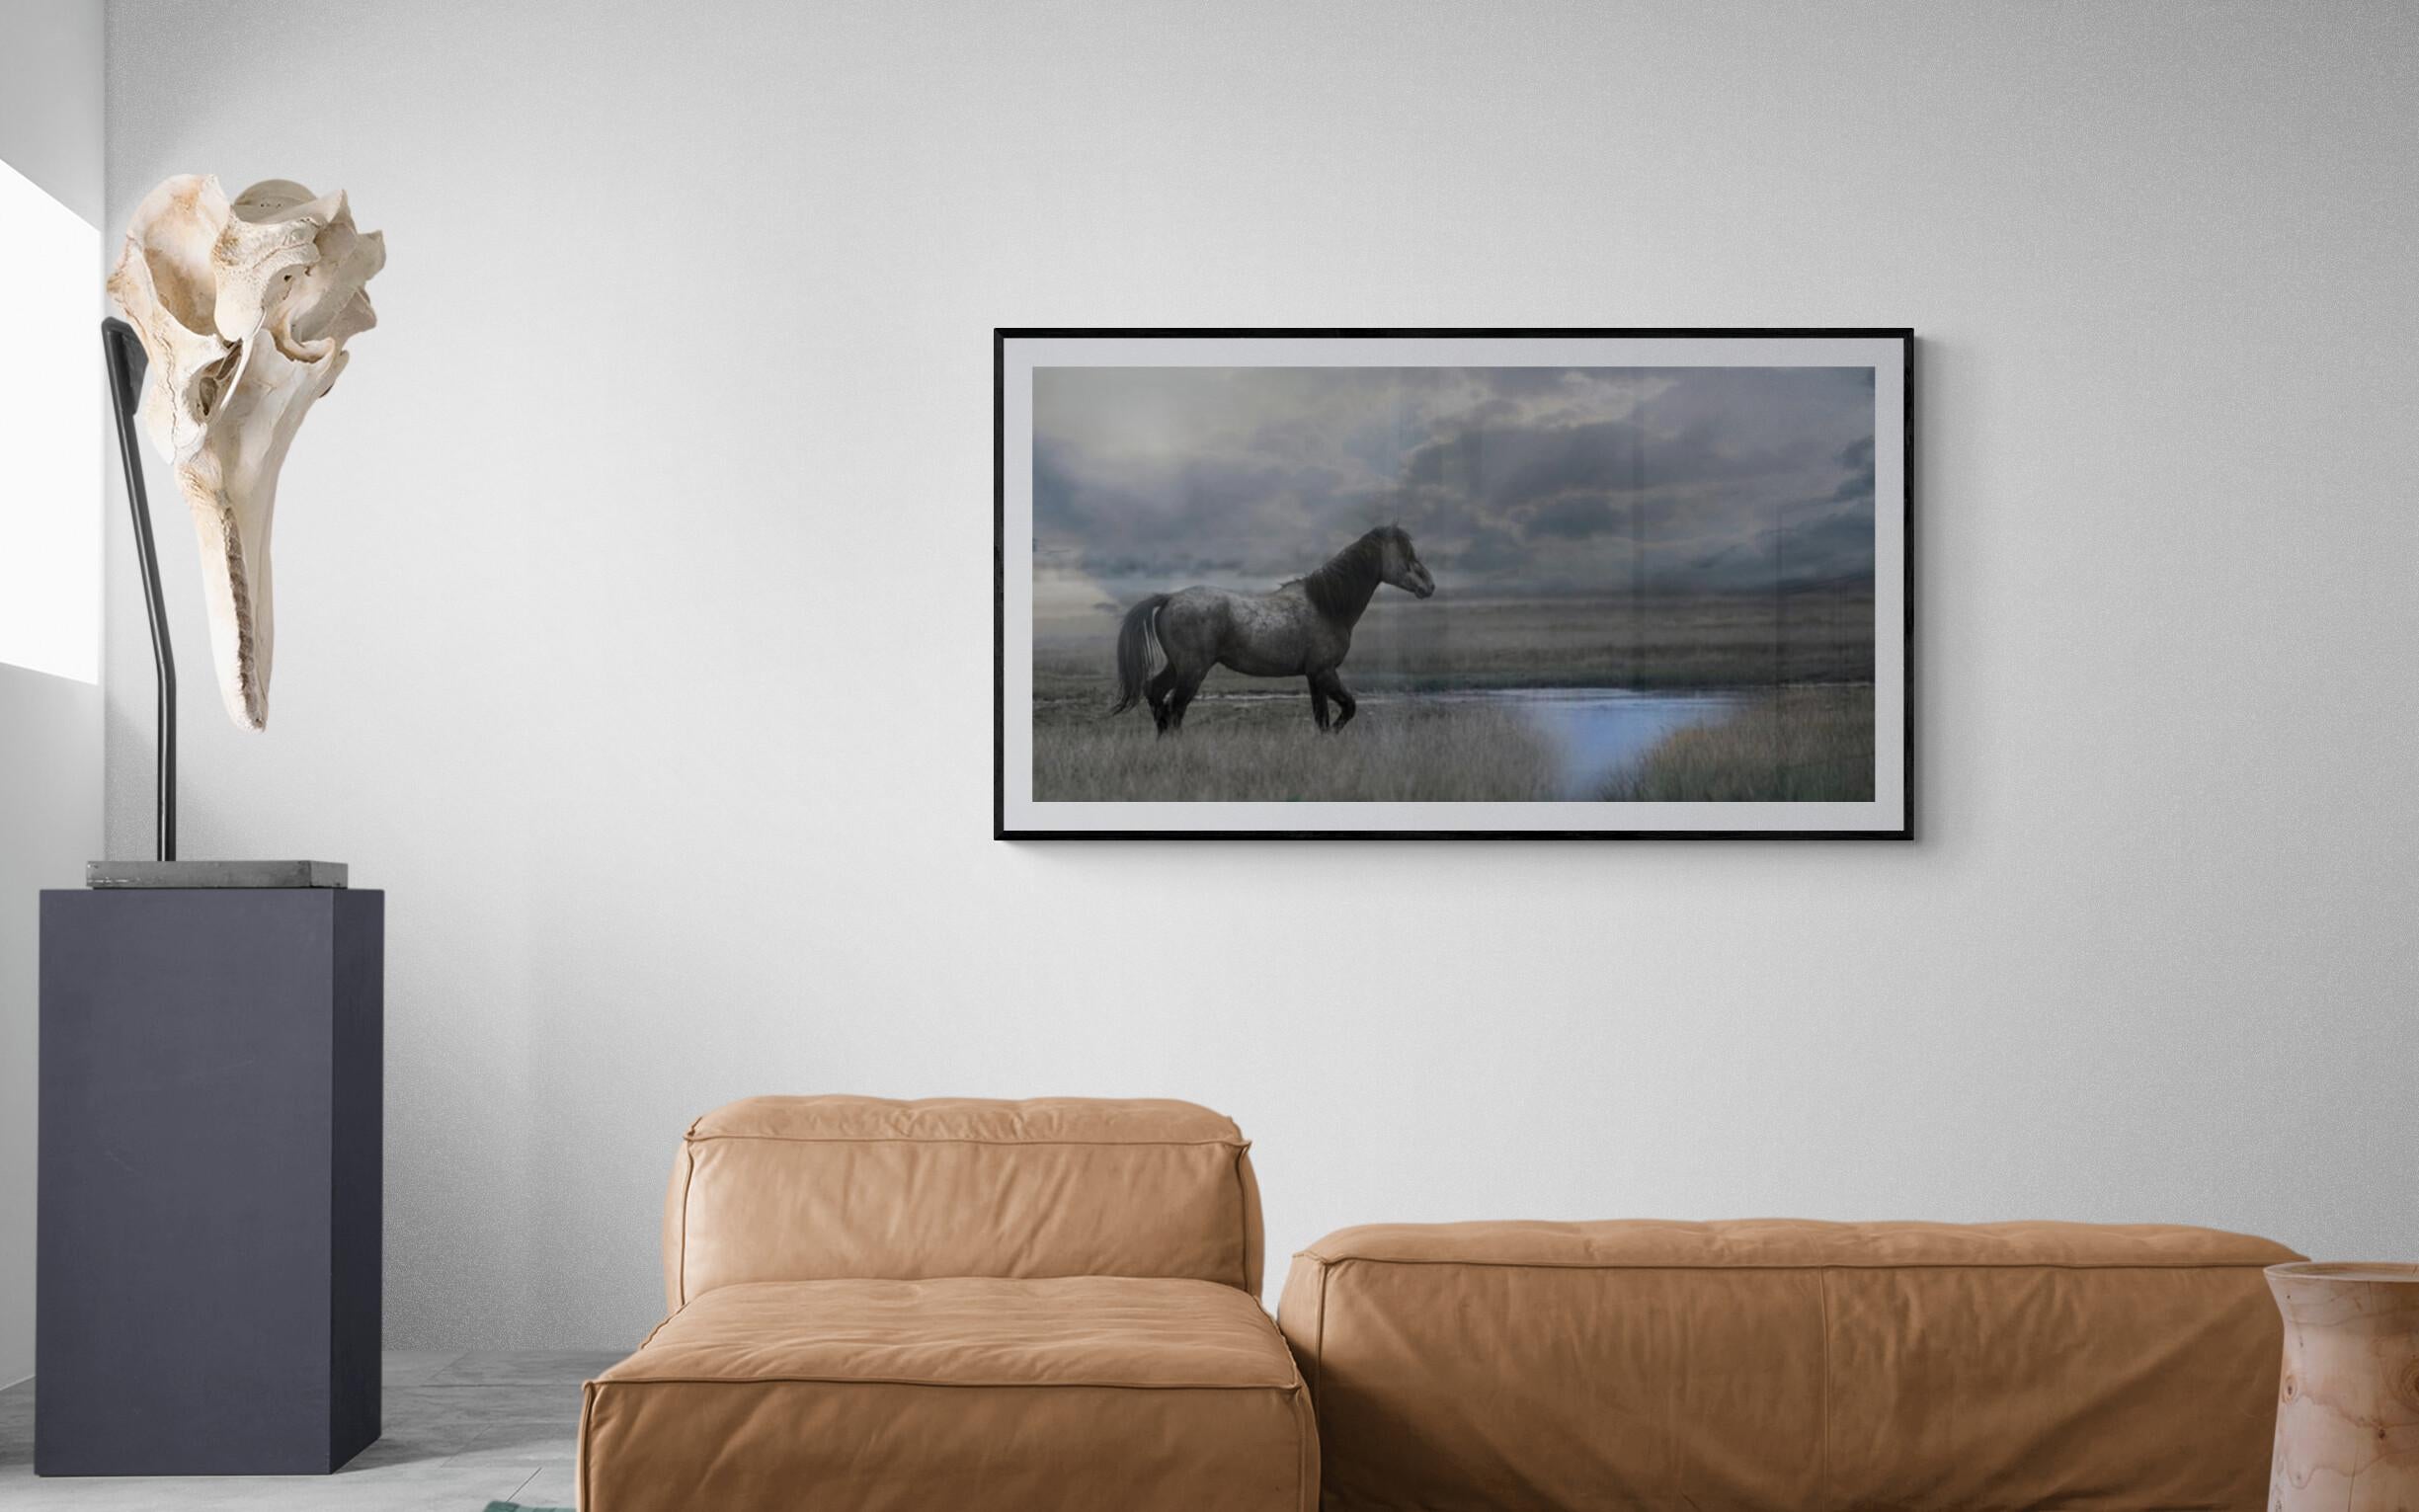 « Once Upon a Time in the West »  Photographie 30x60 de chevaux moutons sauvages - Art en vente 1